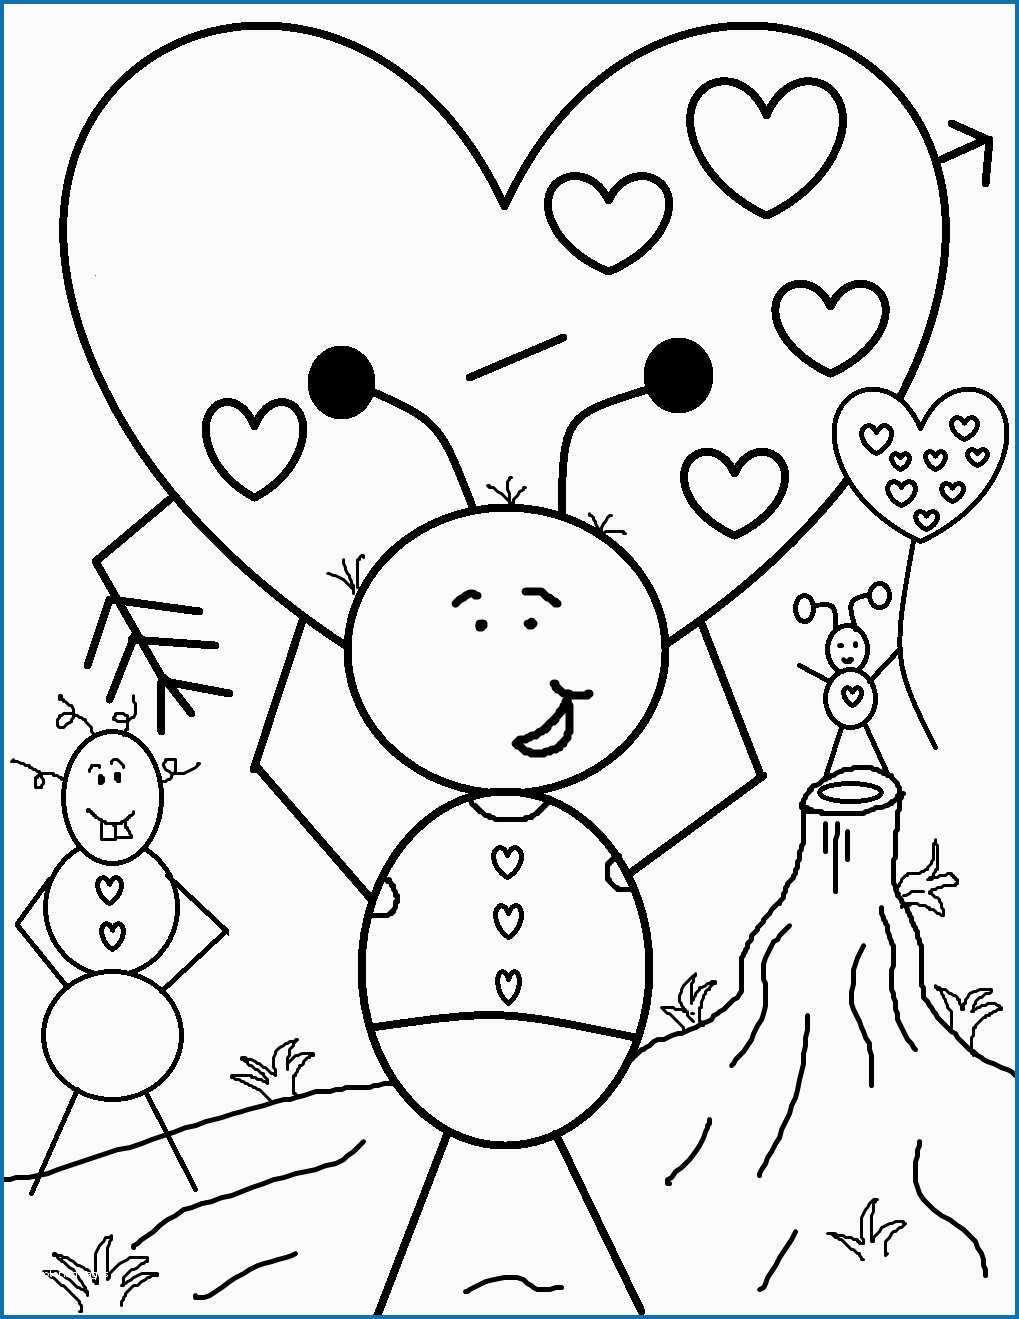 Preschool Valentines Day Coloring Pages Coloring Pages Coloring Book World Valentines Day Pages Printable